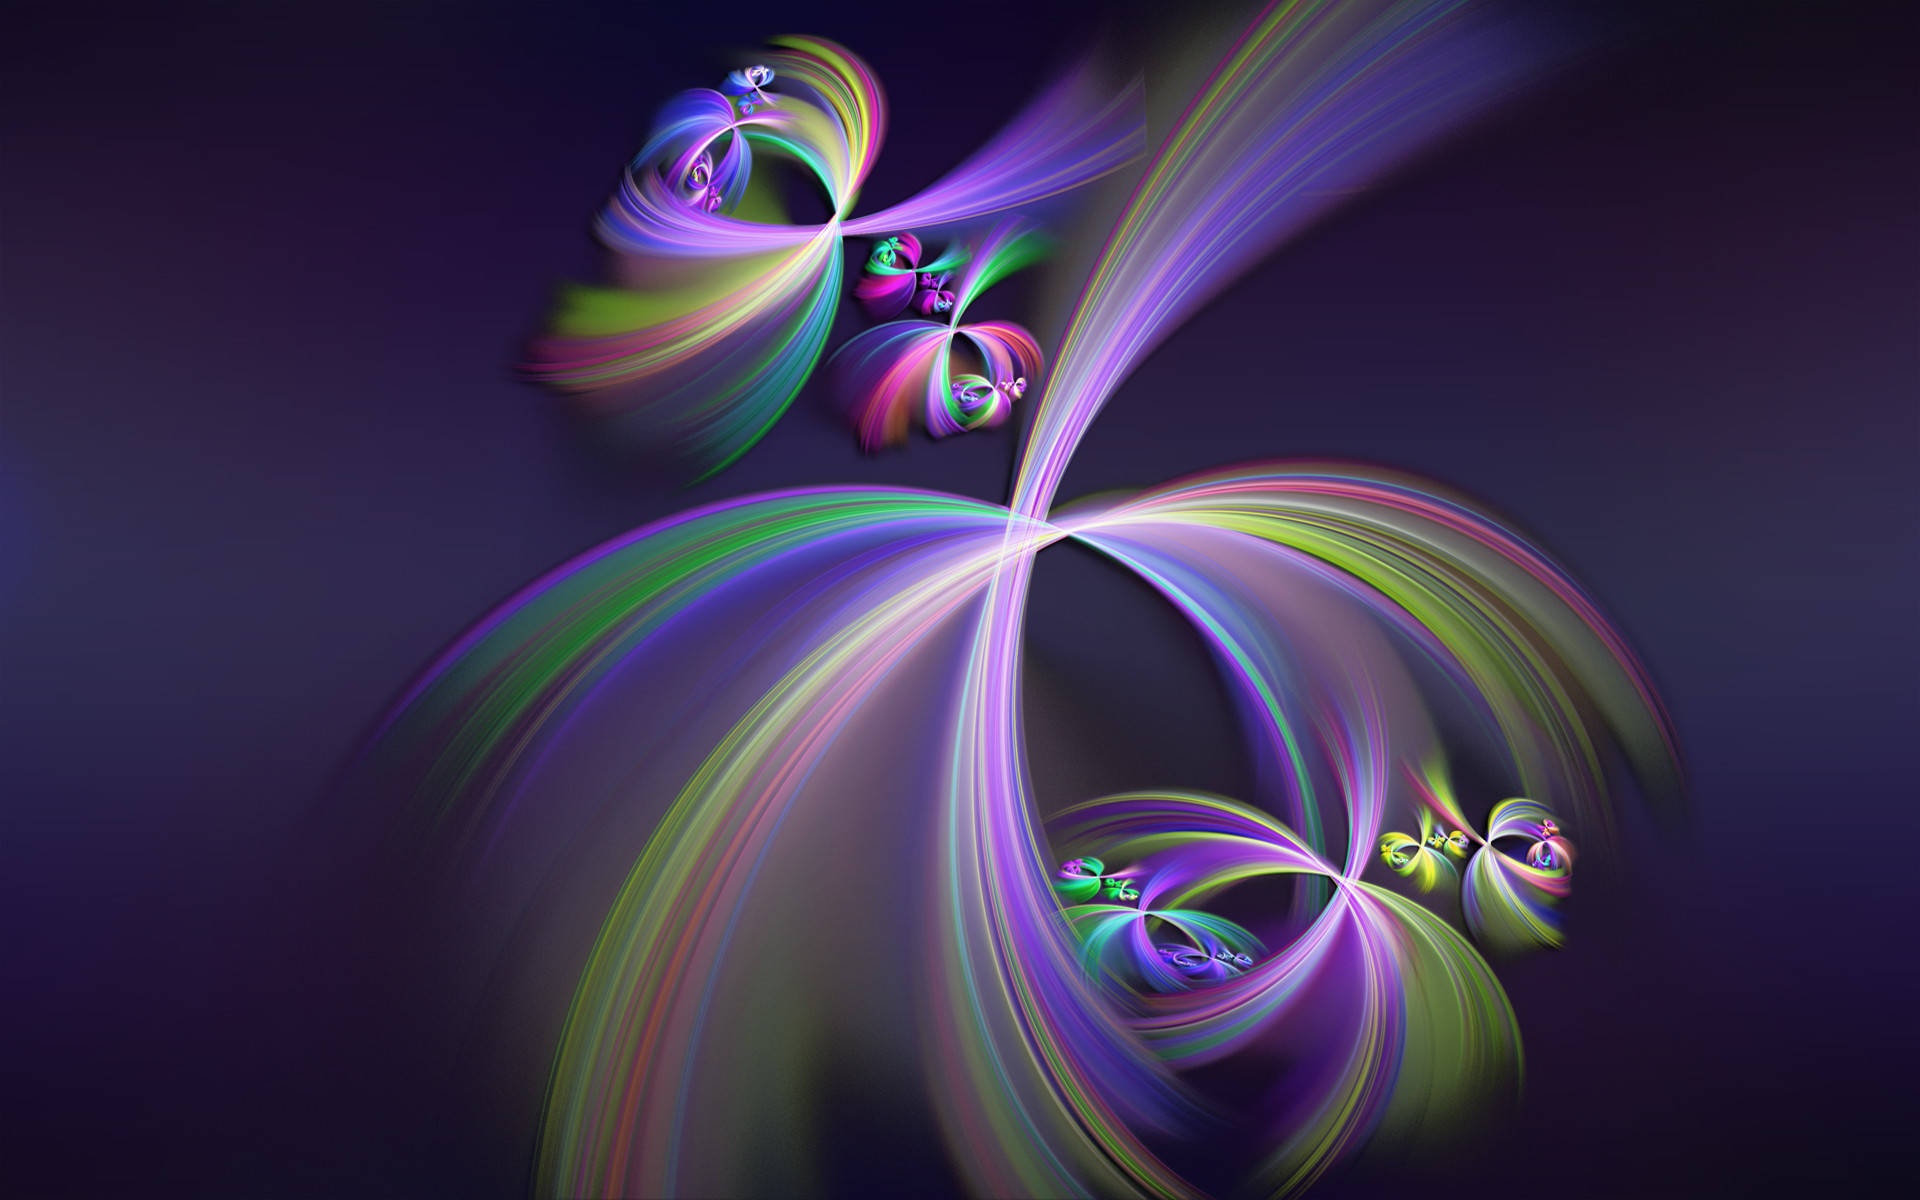 Abstract Swirls And Whirls Screen Saver Wallpaper